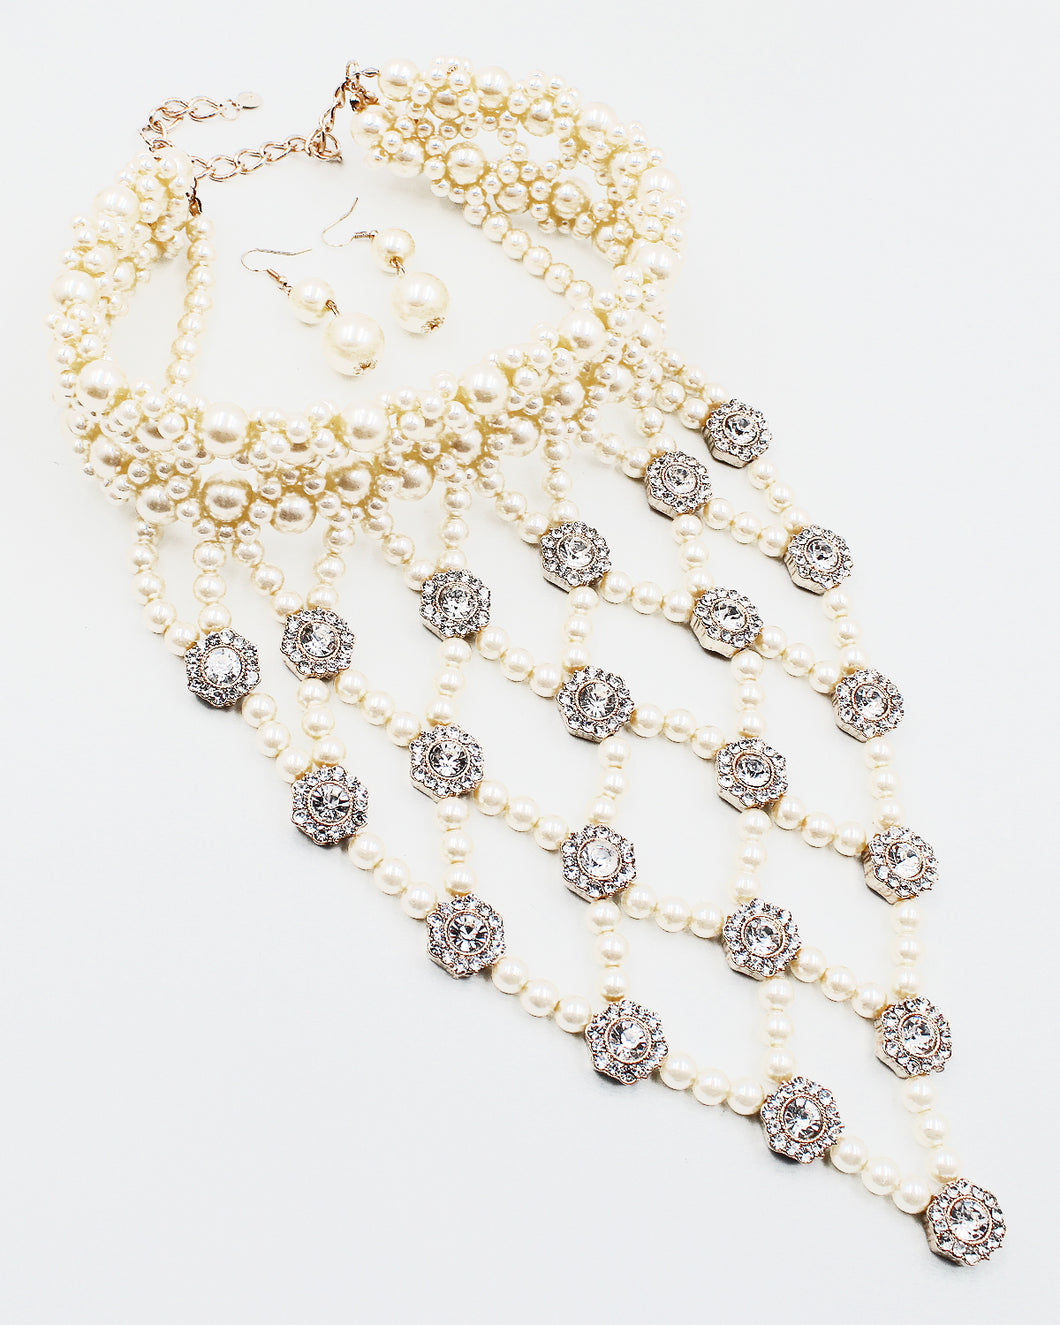 Pearl Beaded Bib Necklace with Crystal Stones